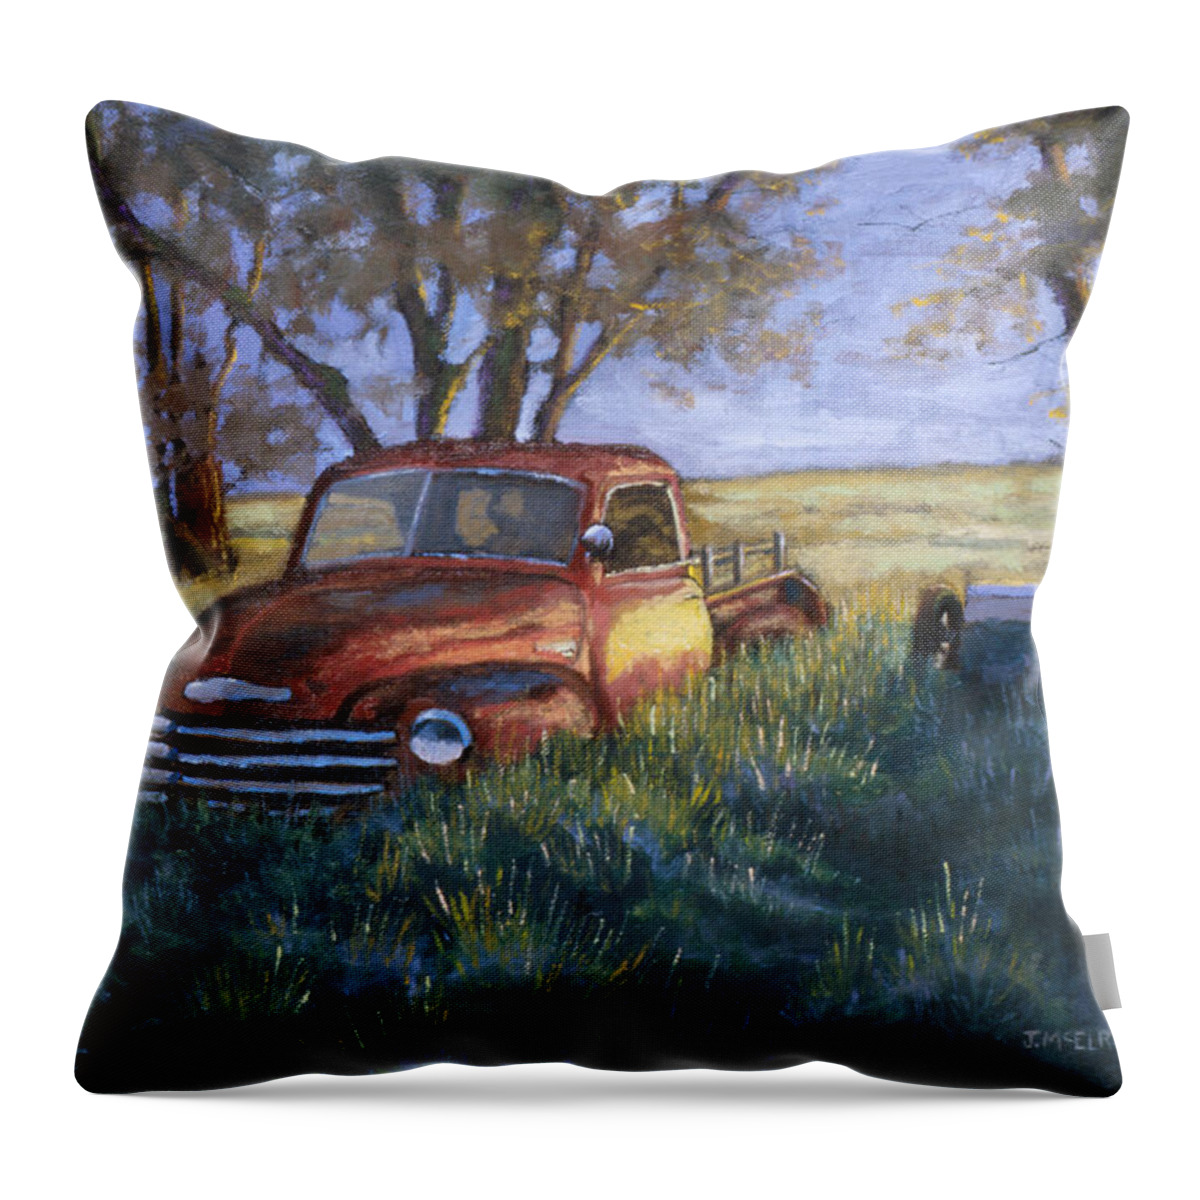 Pickup Truck Throw Pillow featuring the painting Farm Memories by Jerry McElroy